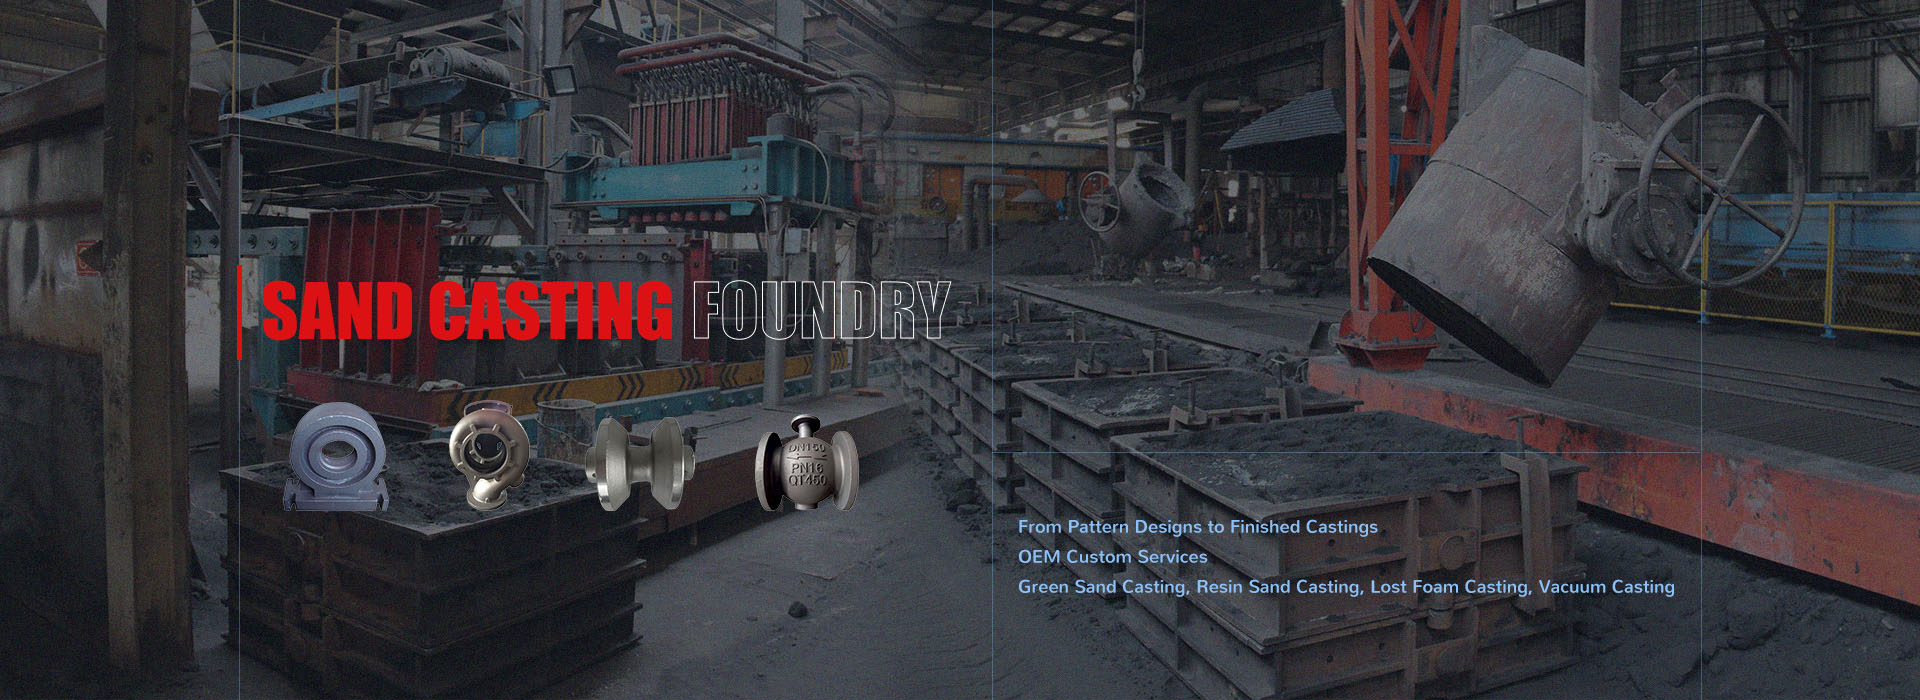 grey iron and ductile iron sand casting foundry in China